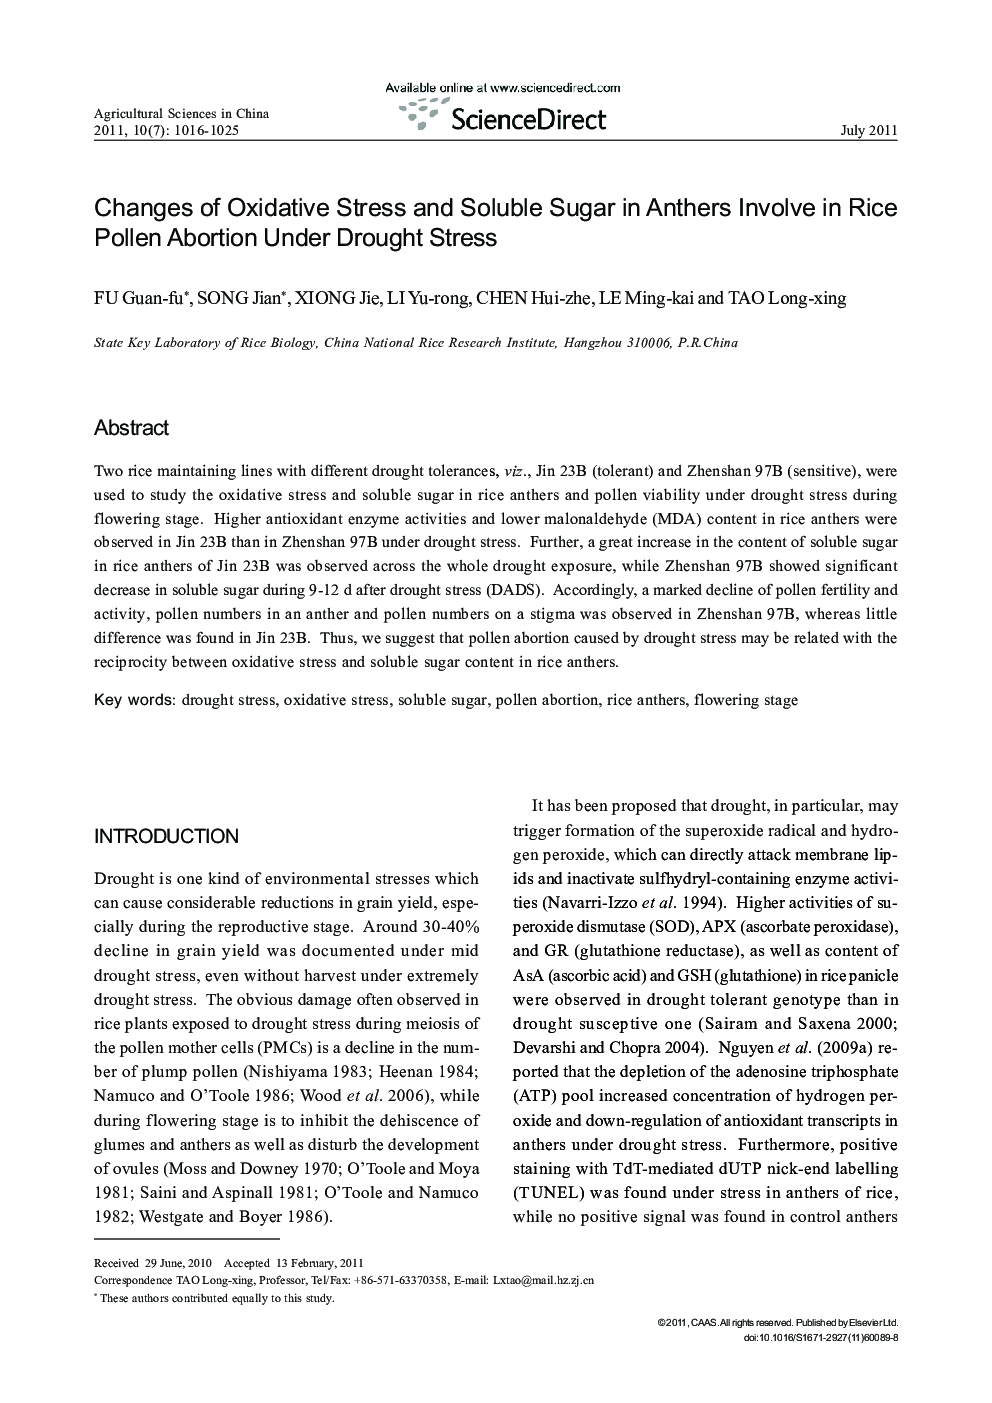 Changes of Oxidative Stress and Soluble Sugar in Anthers Involve in Rice Pollen Abortion Under Drought Stress